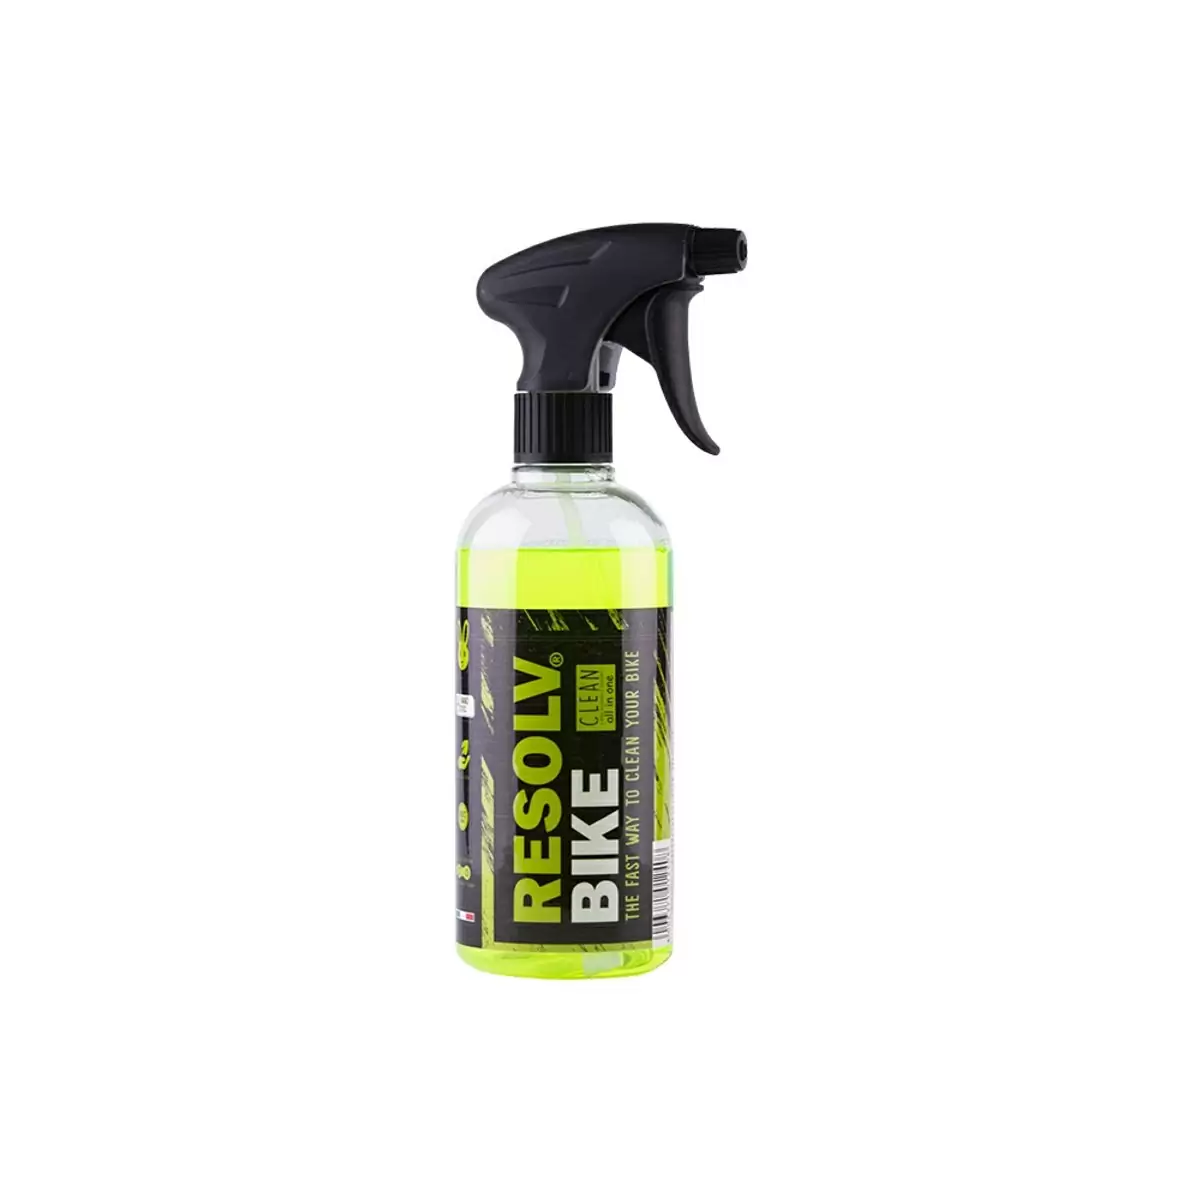 Clean Detergent For Bike Cleaning 500ml - image